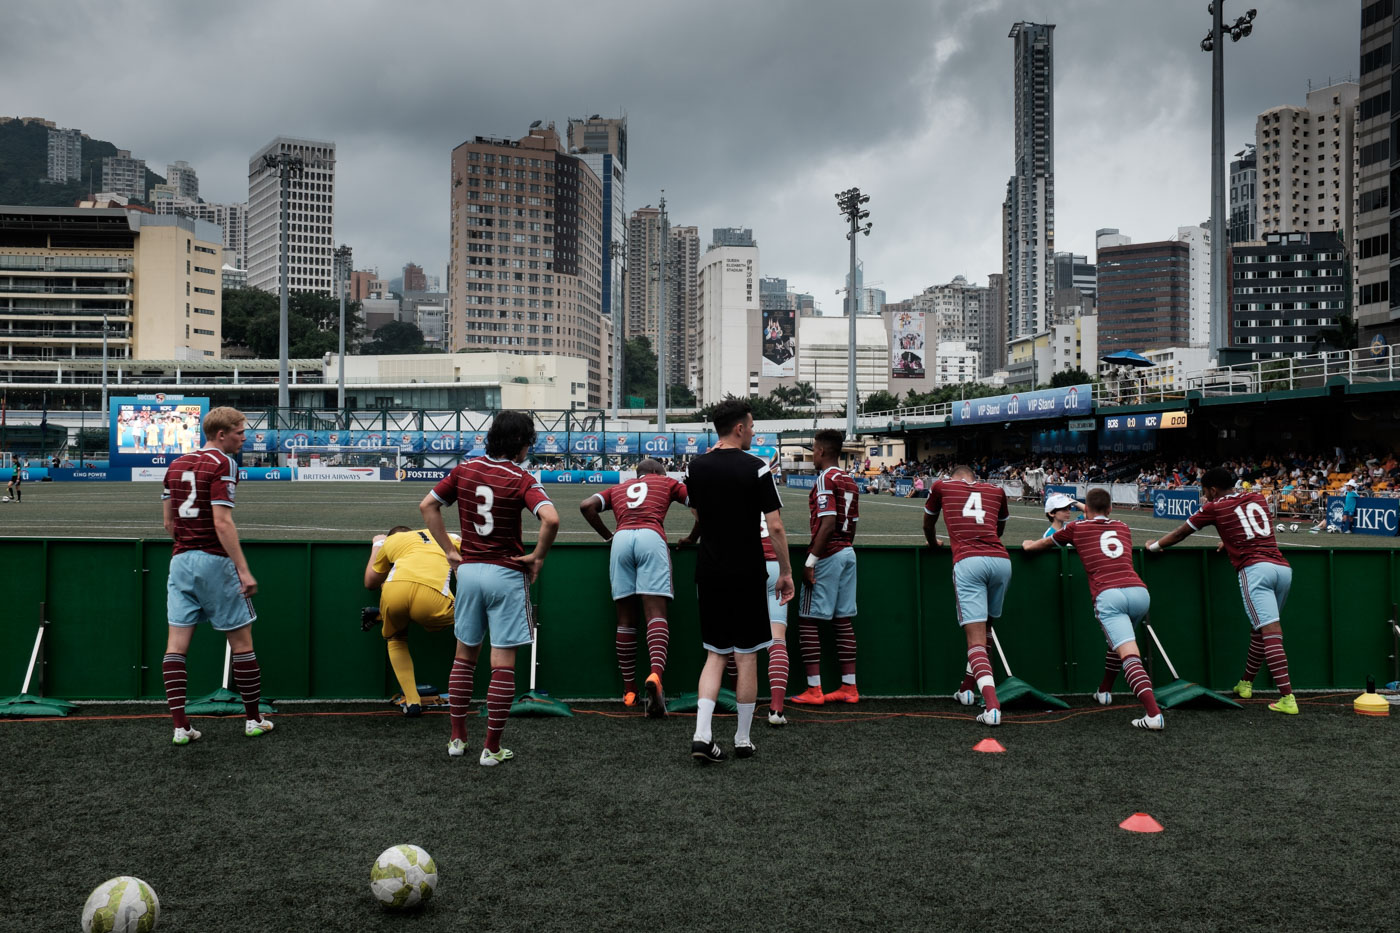 Players stretch before game time at a tournament in Hong Kong